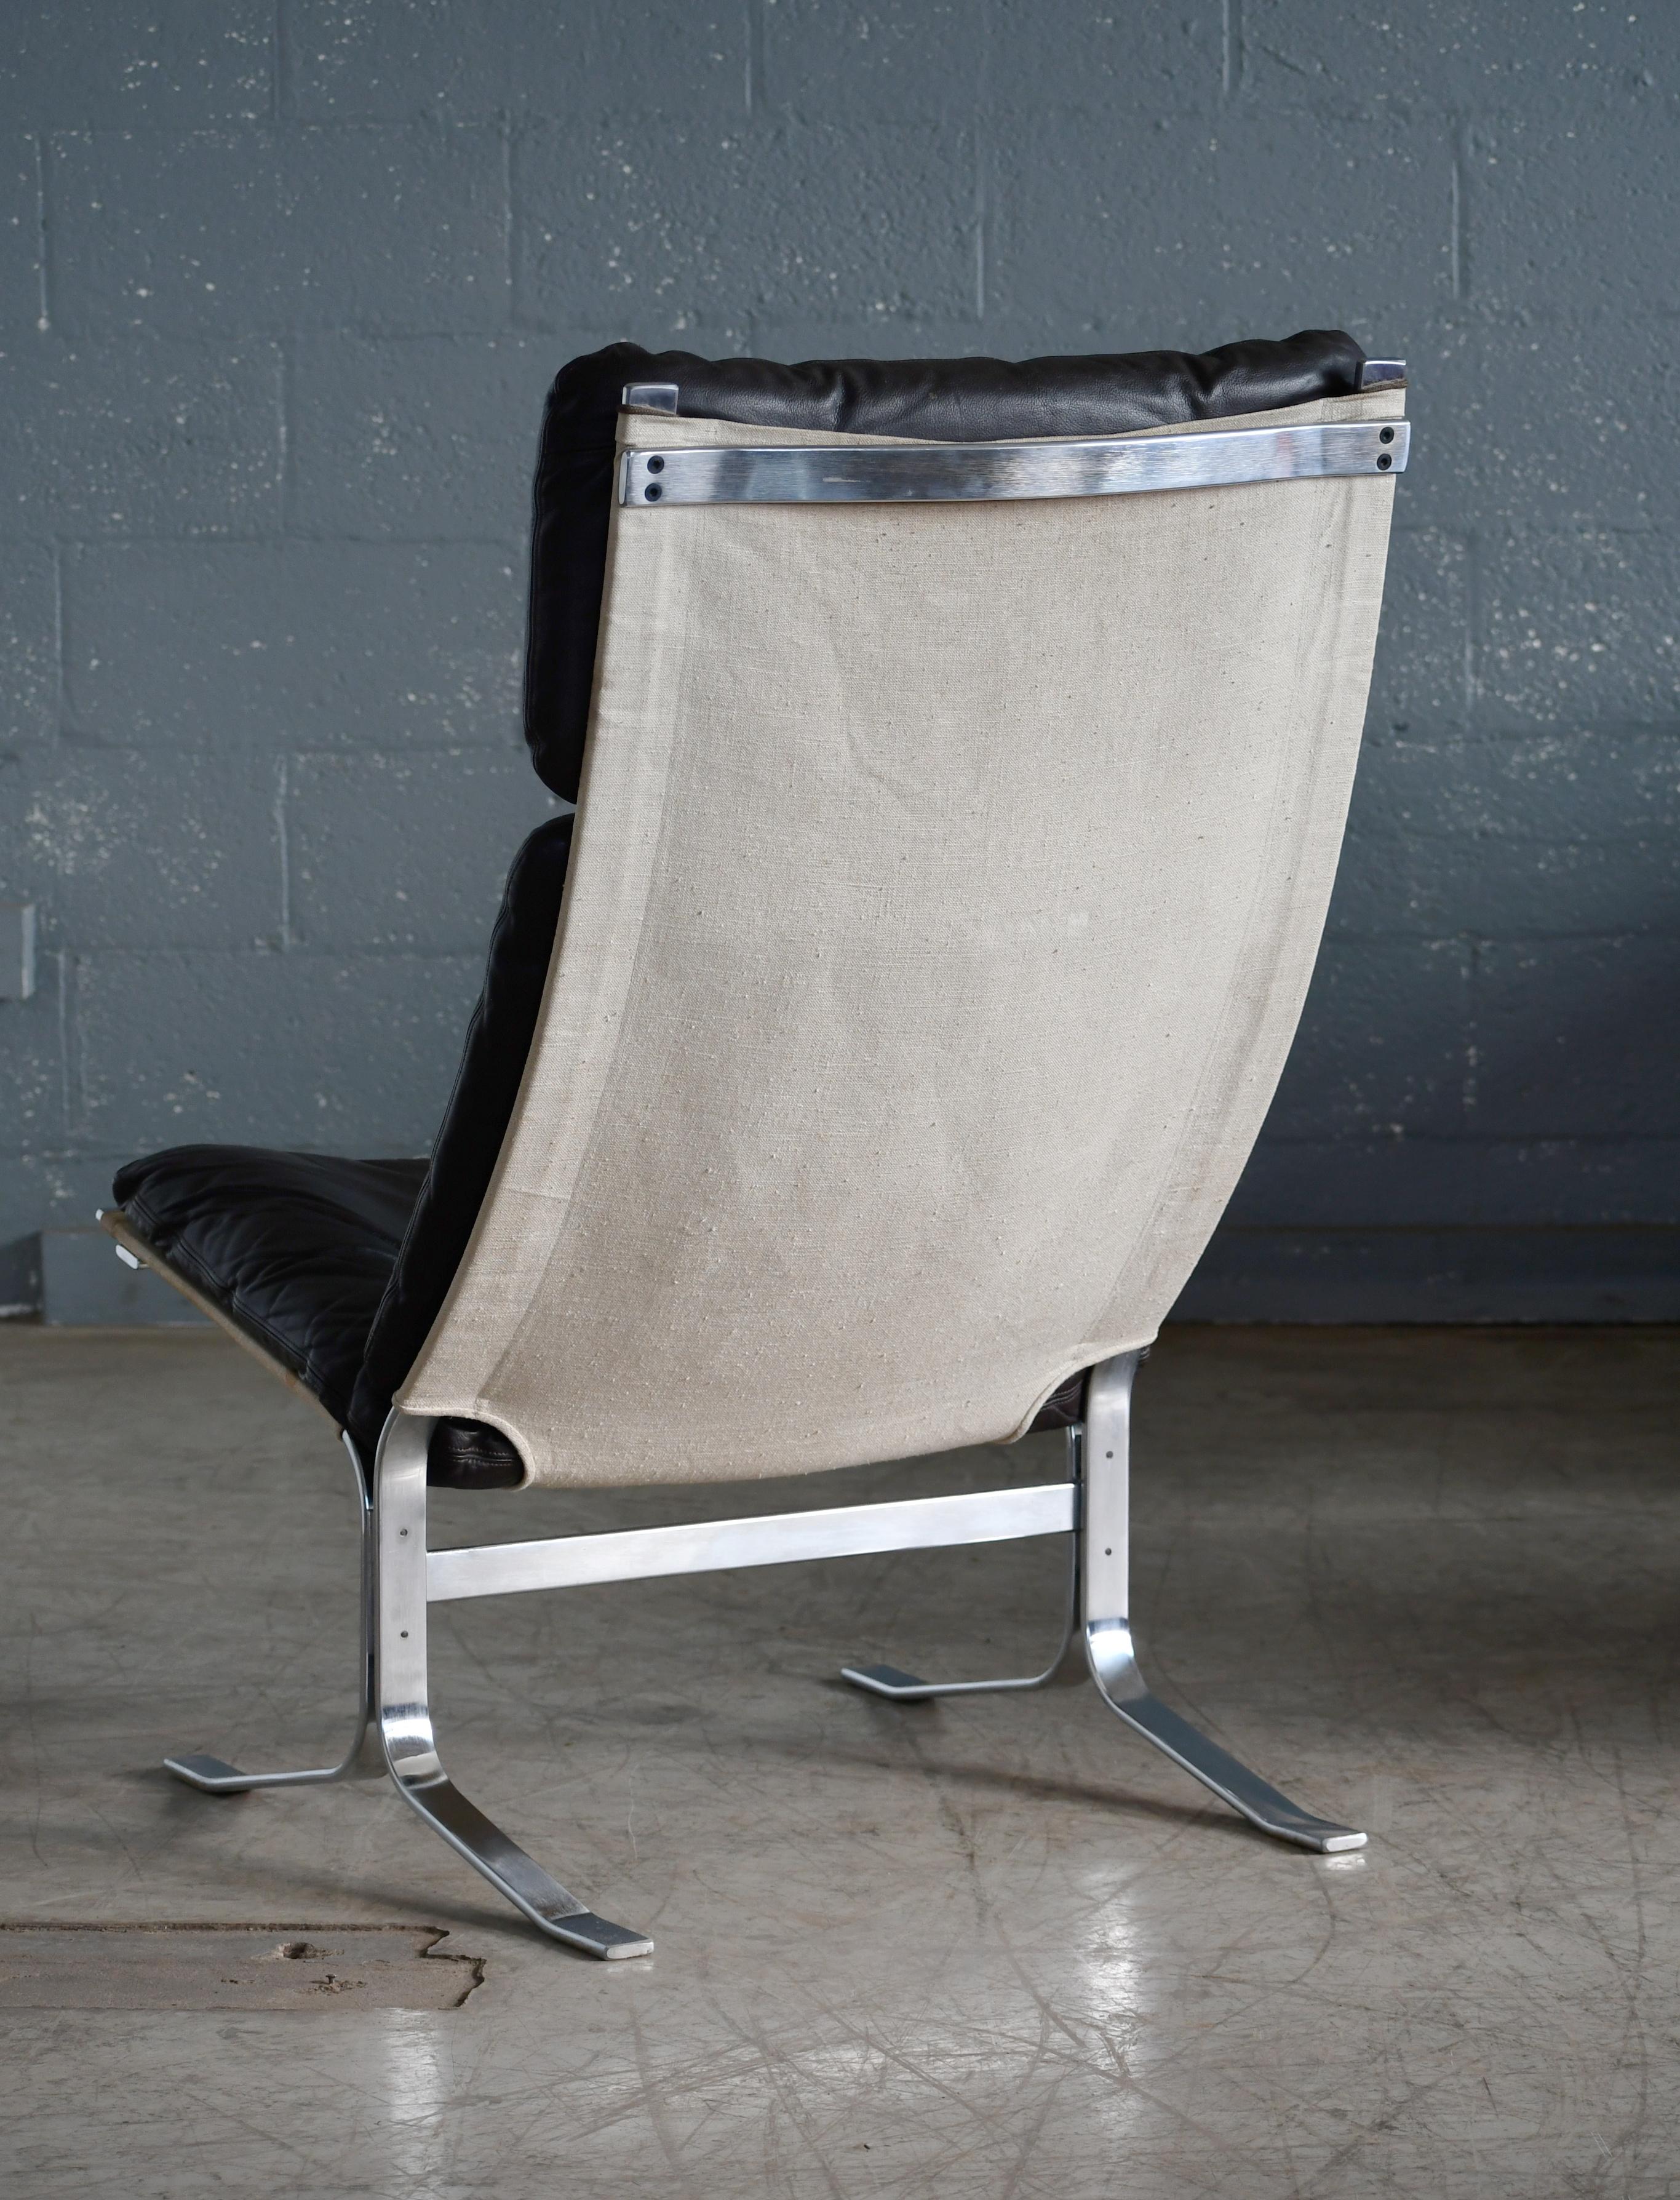 Danish Mid-Century Poul Kjaerholm Style Easy Chair in Leather and Steel ca, 1970 For Sale 2